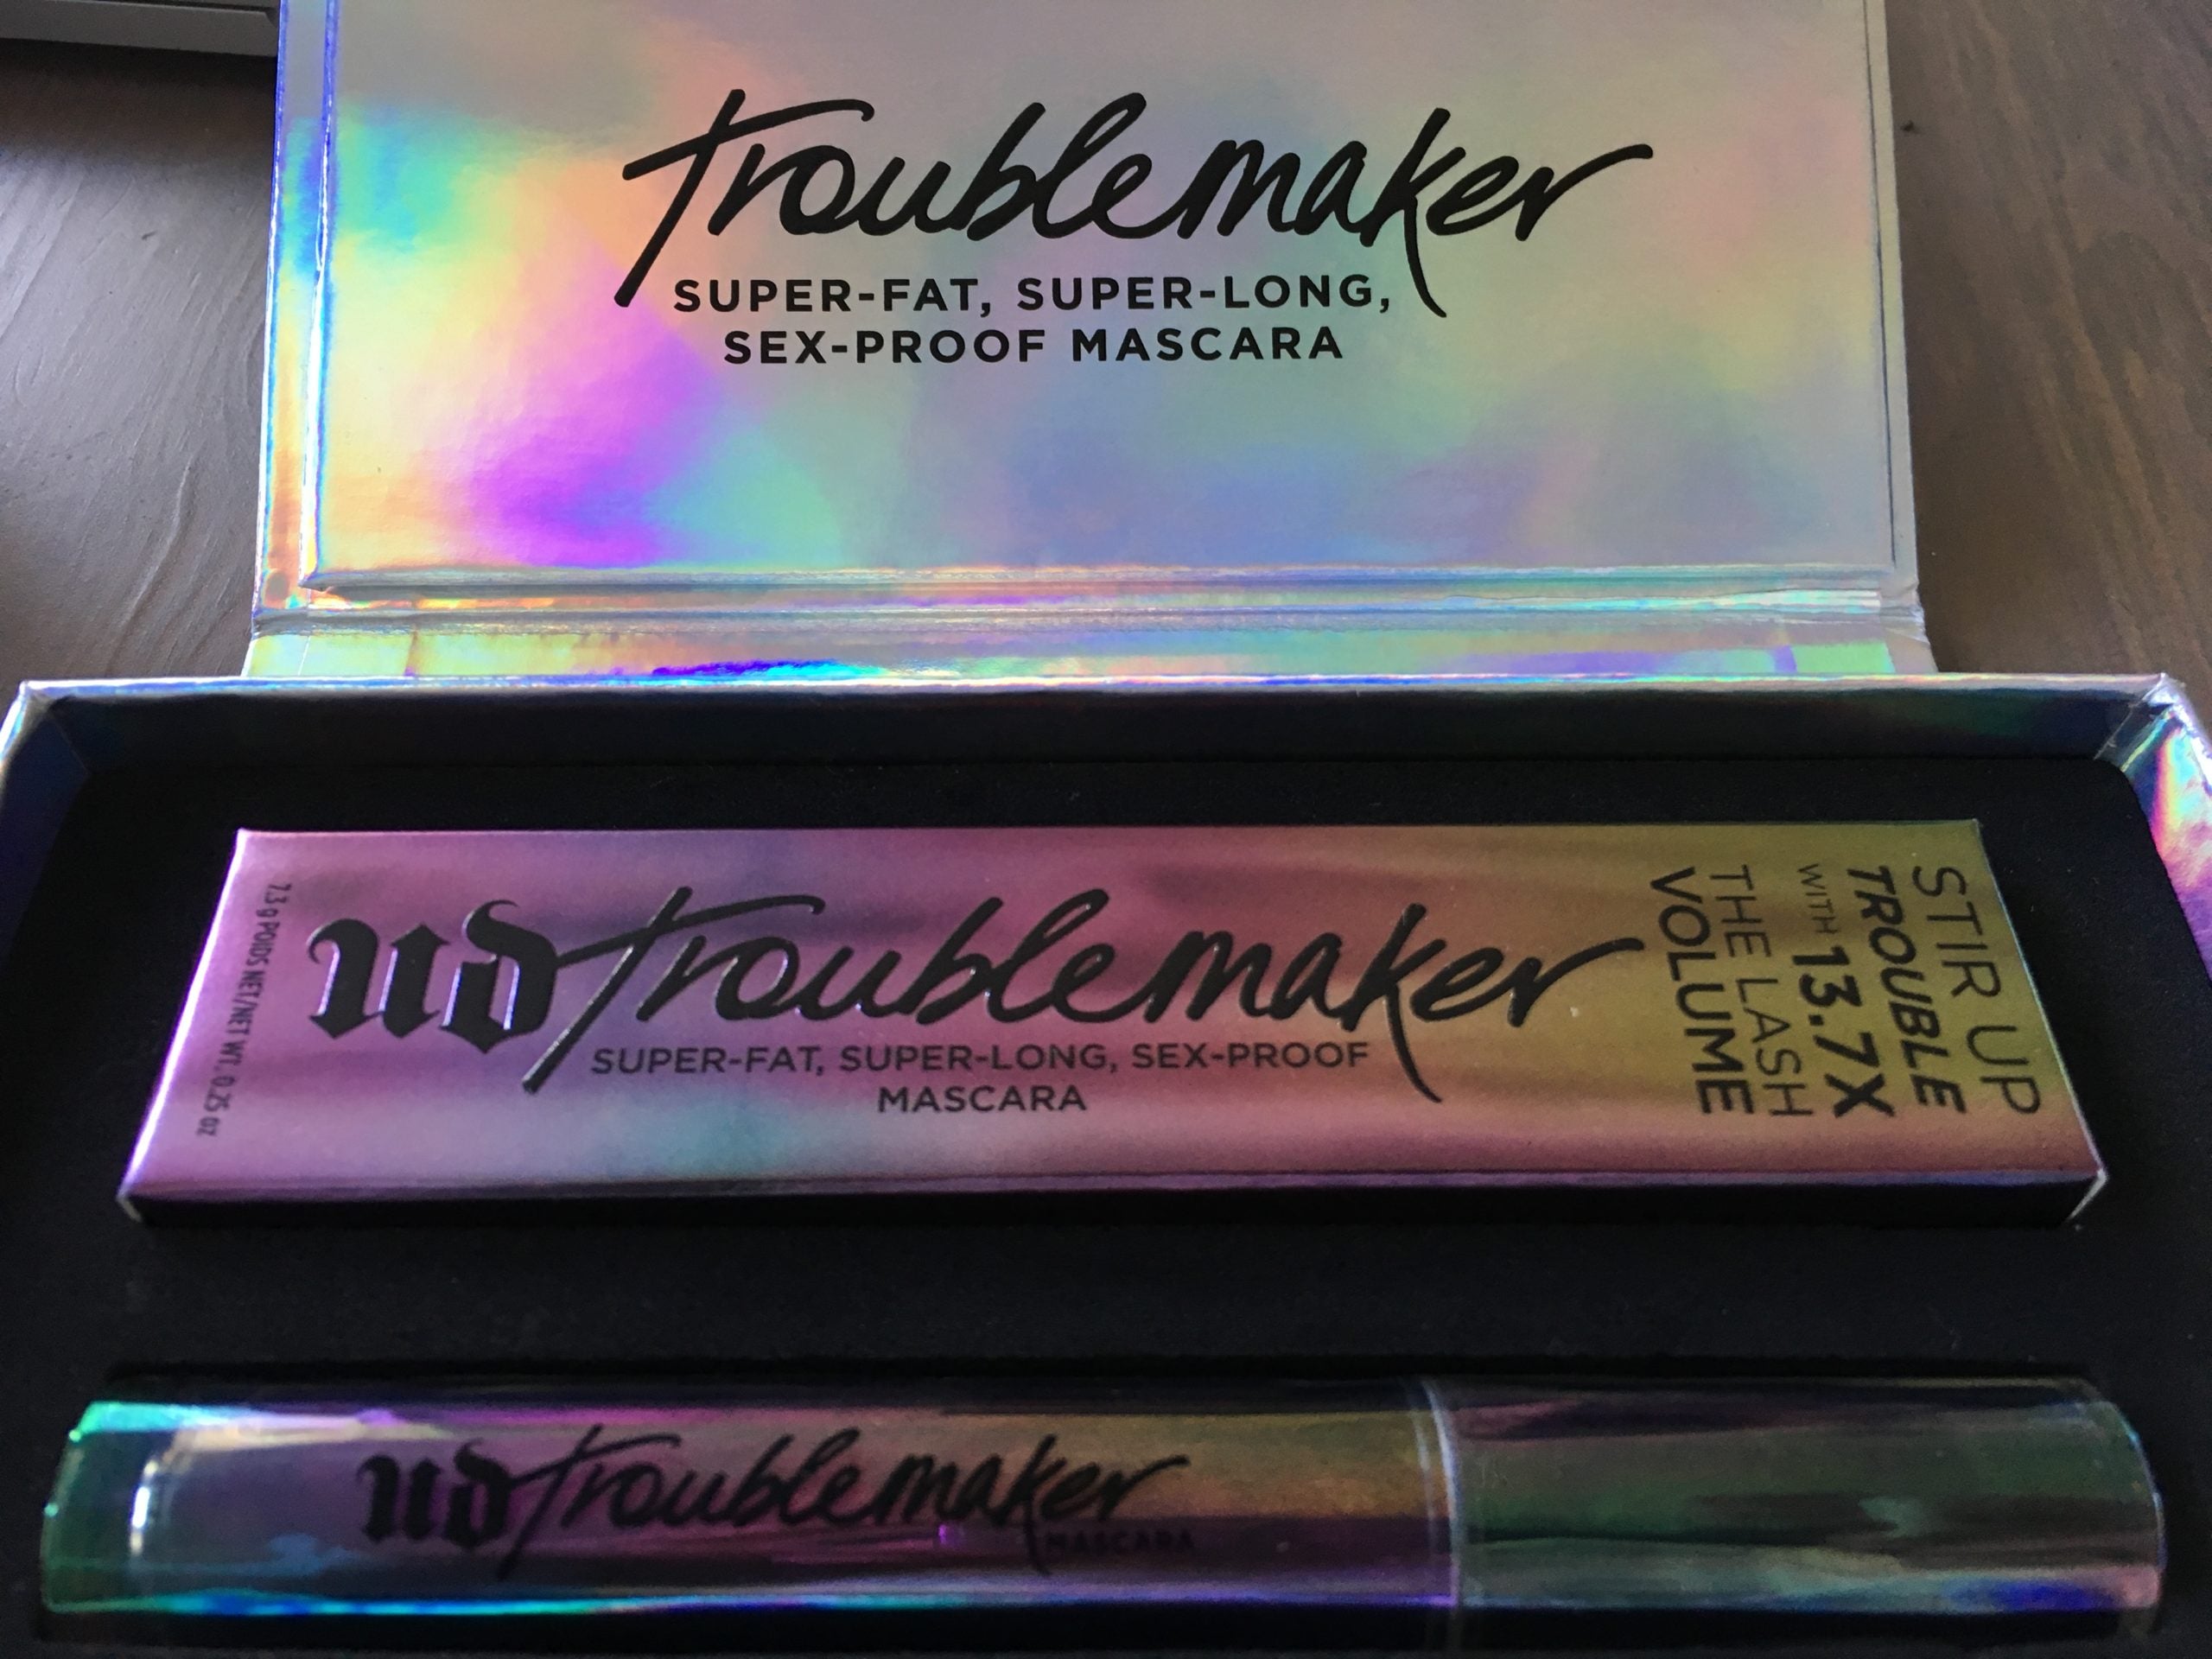 Review, Photos, Swatches, Makeup Trend 2017, 2018: Urban Decay Troublemaker Mascara, Long Lashes, Full Lashes, Eyelashes, Volumizing Mascara, Lengthening Mascara, Sephora, High-End Makeup, Luxury Makeup